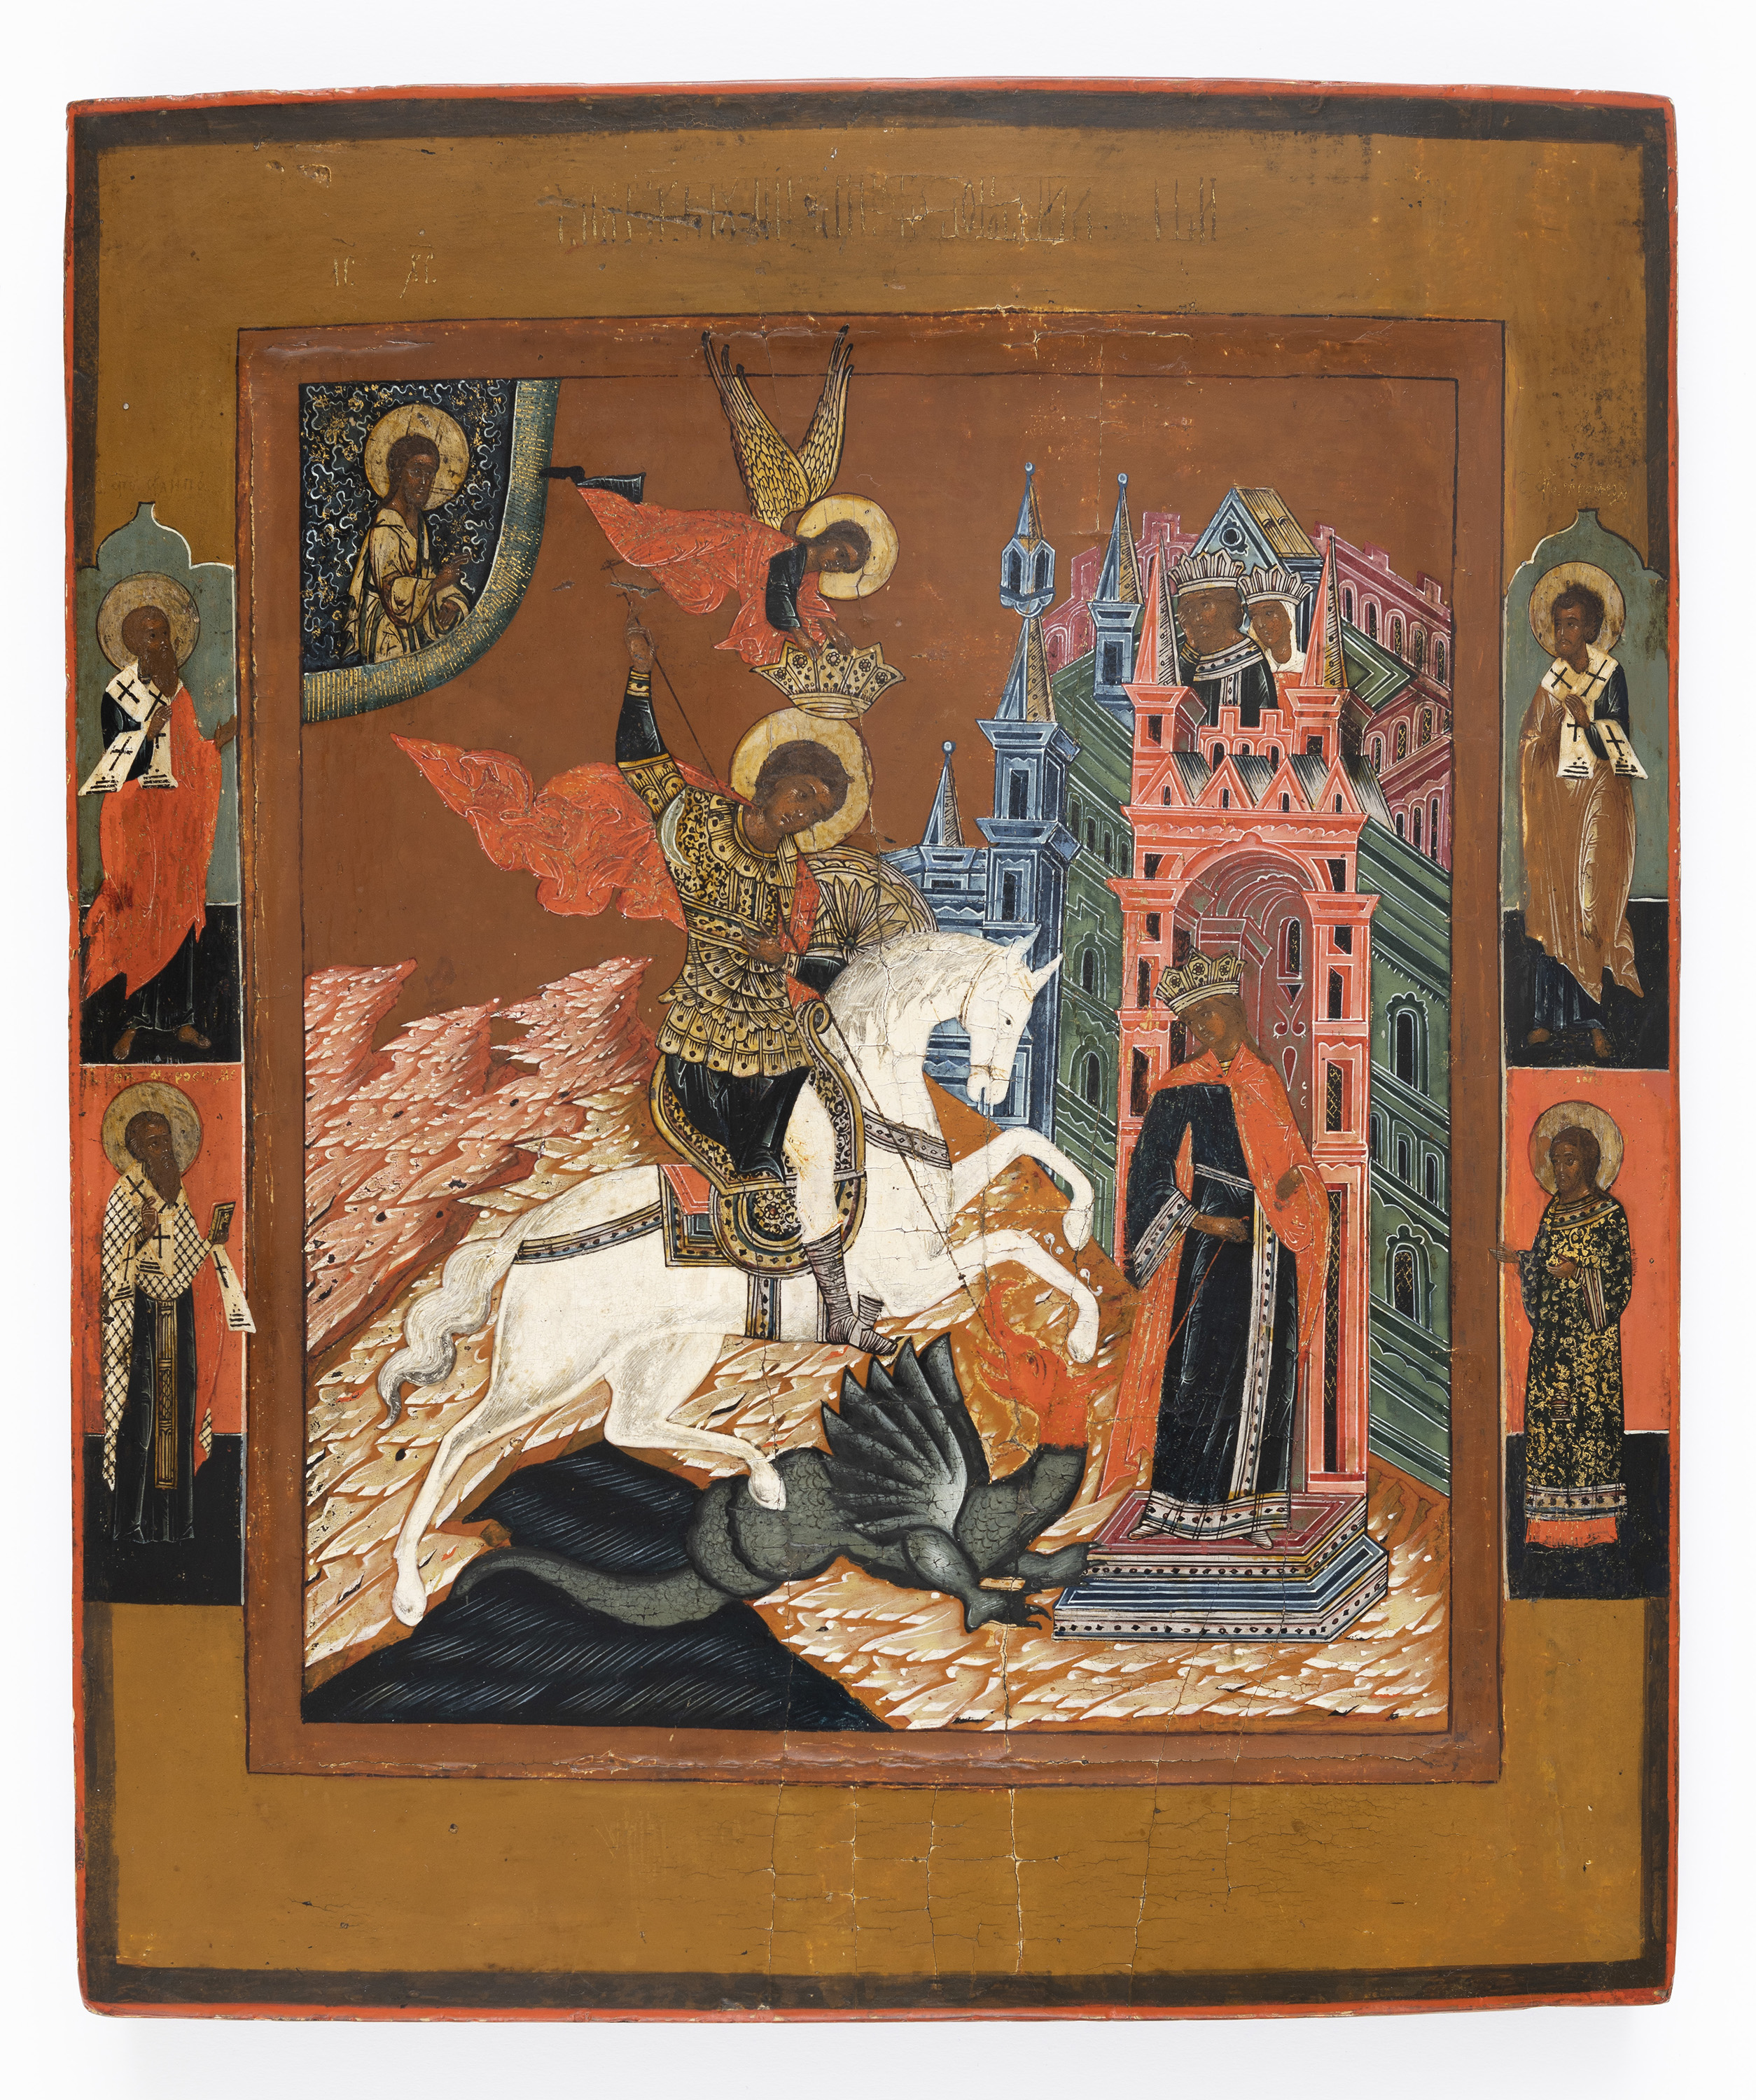 <p>Saint George and the Dragon, 19th century<br />
Russia, Mstera<br />
egg tempera and gesso on linen over wood<br />
352 x 302 x 25 mm<br />
on loan from a private collection, Melbourne</p>
